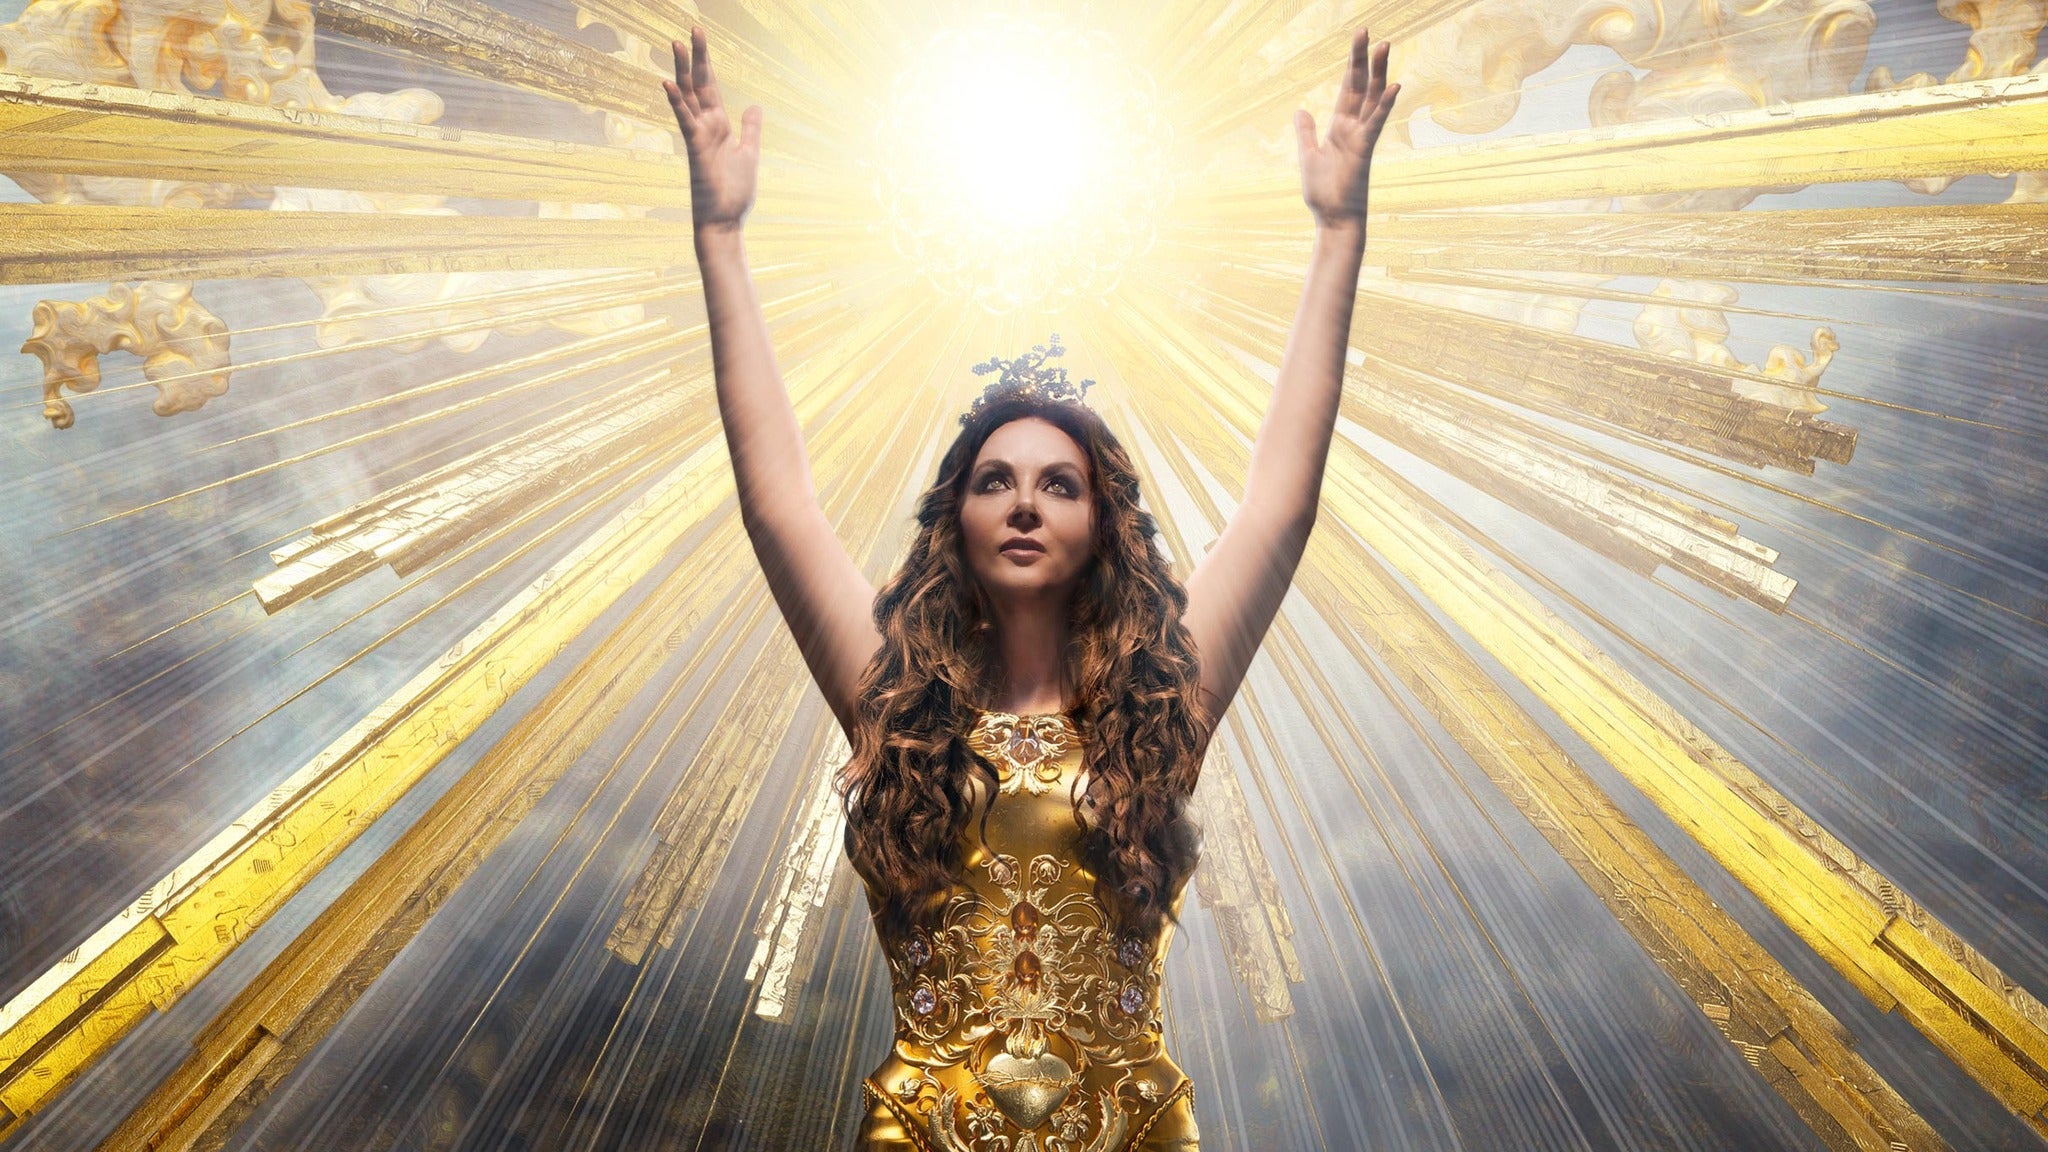 Image used with permission from Ticketmaster | Sarah Brightman: A Christmas Symphony tickets